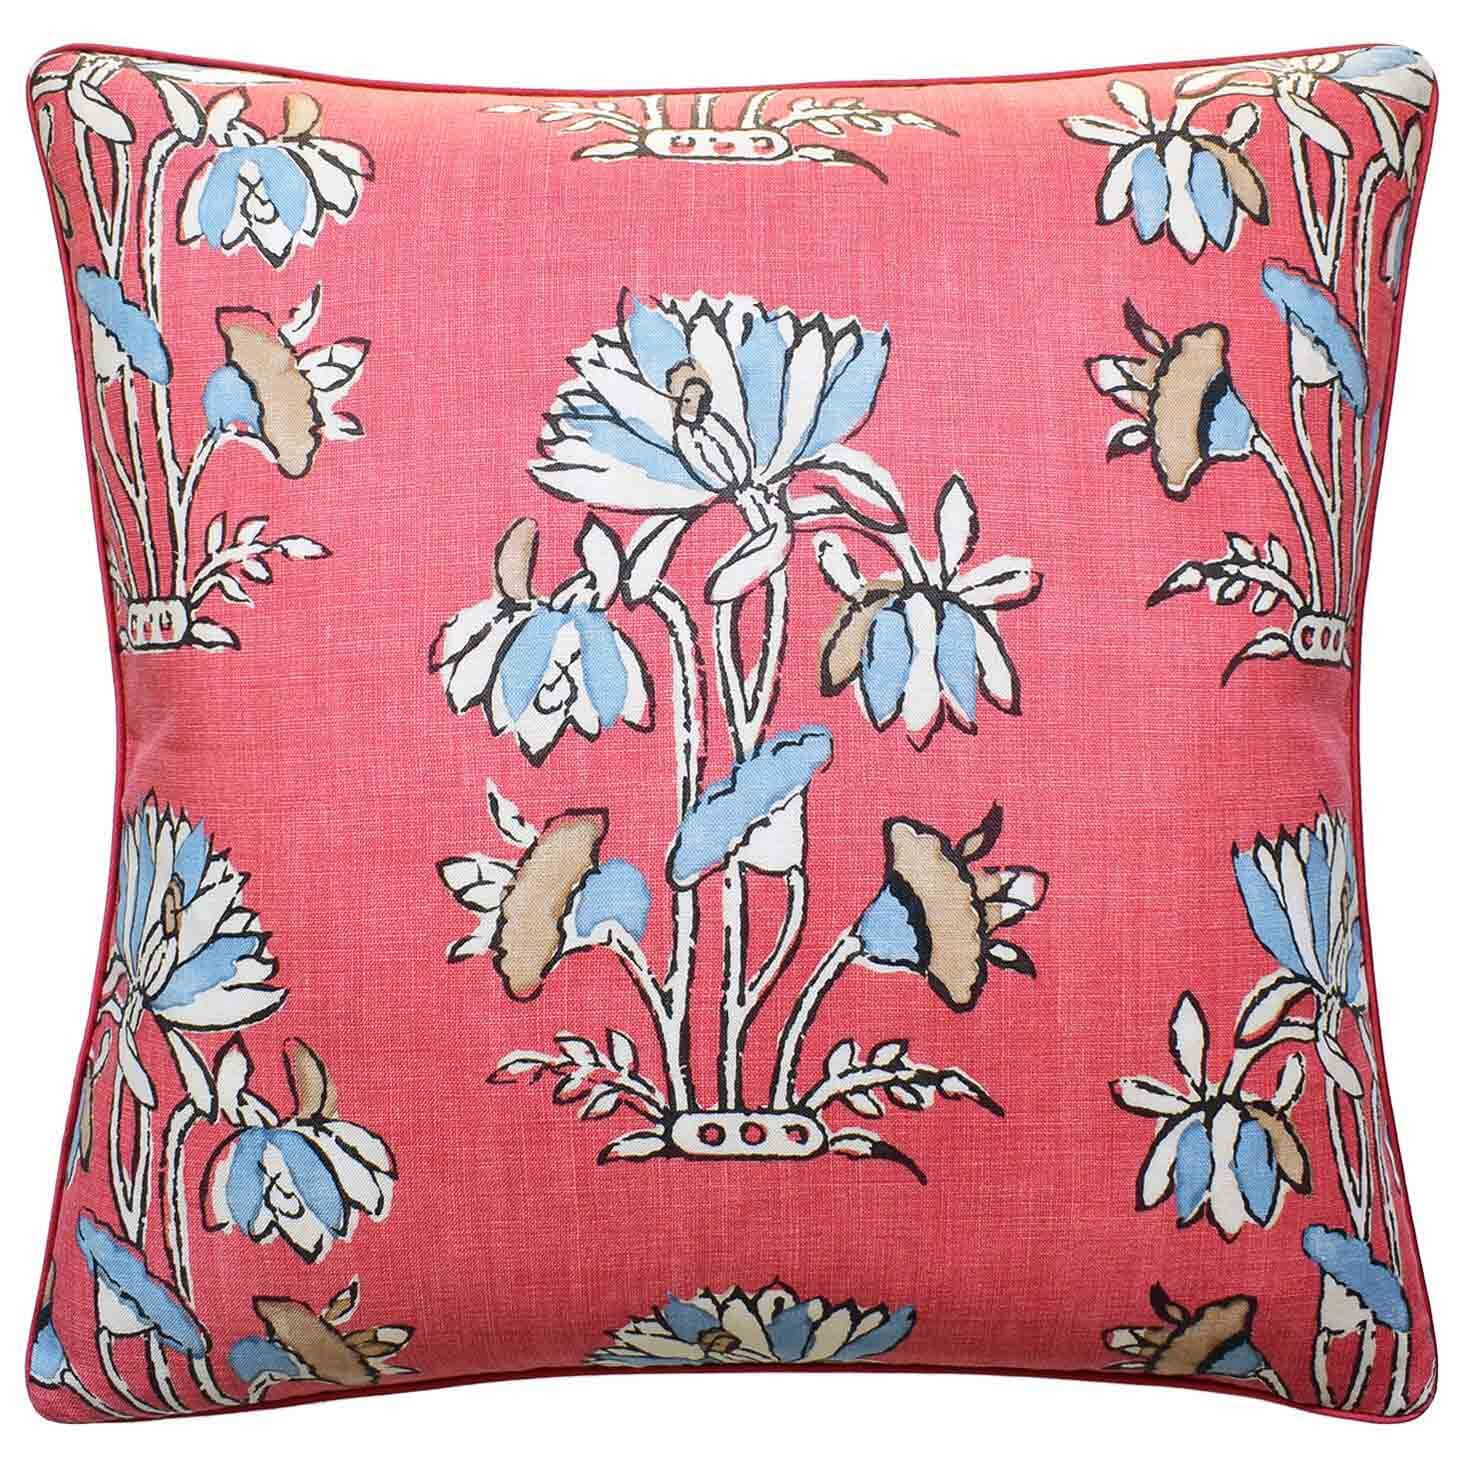 Lily Flower Coral - Throw Pillow by Ryan Studio